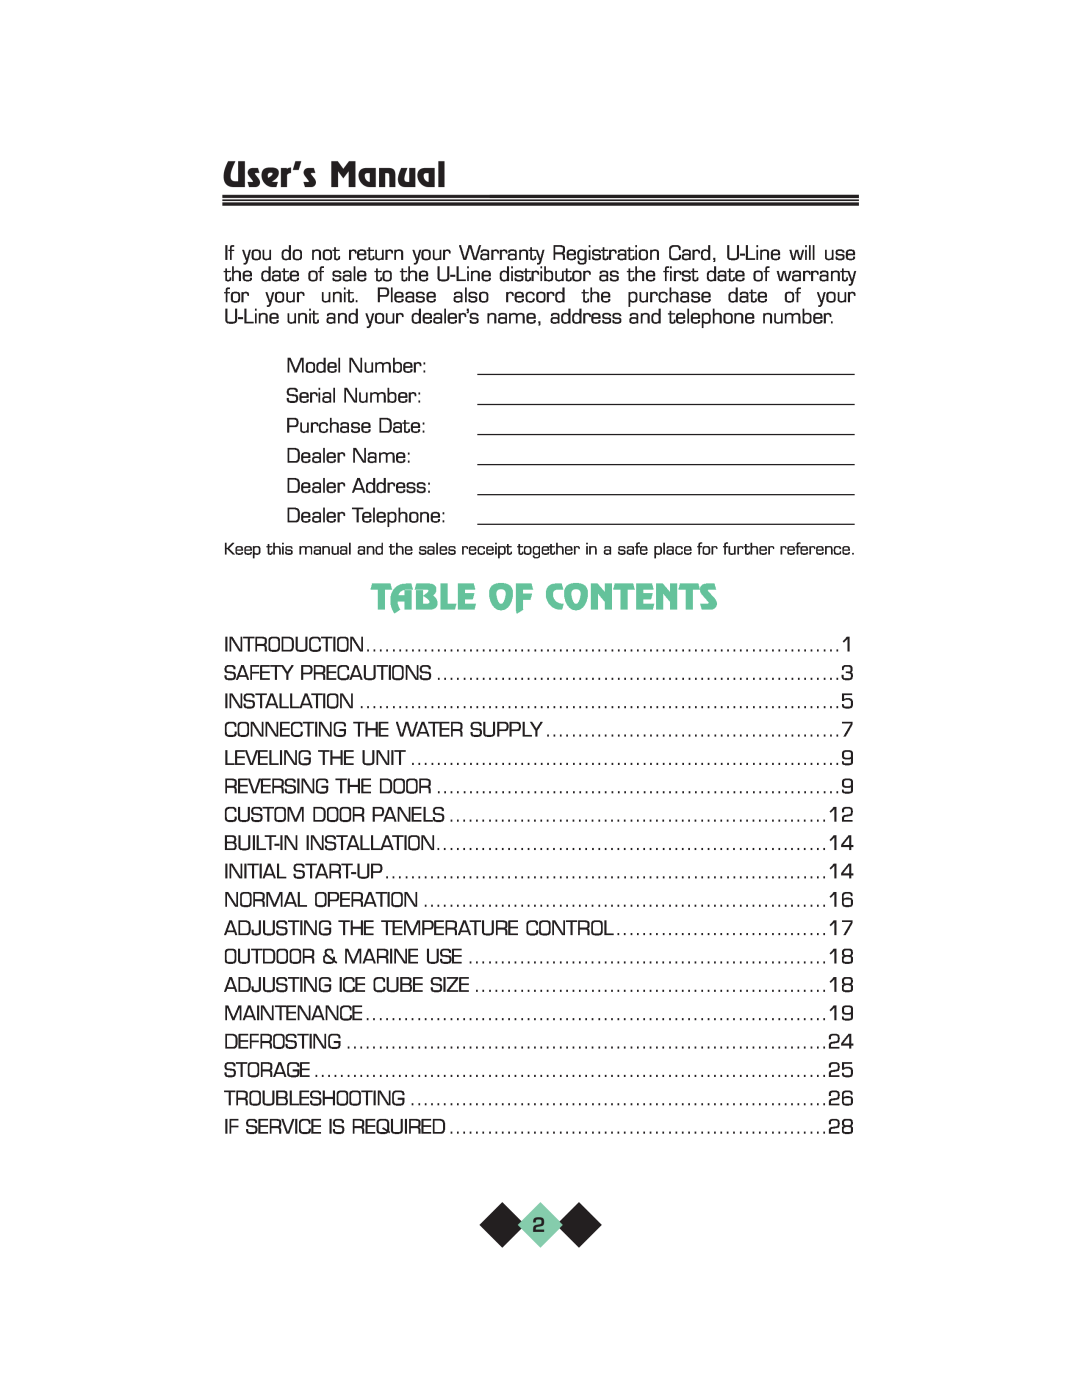 U-Line pmn manual User’s Manual, Table Of Contents 